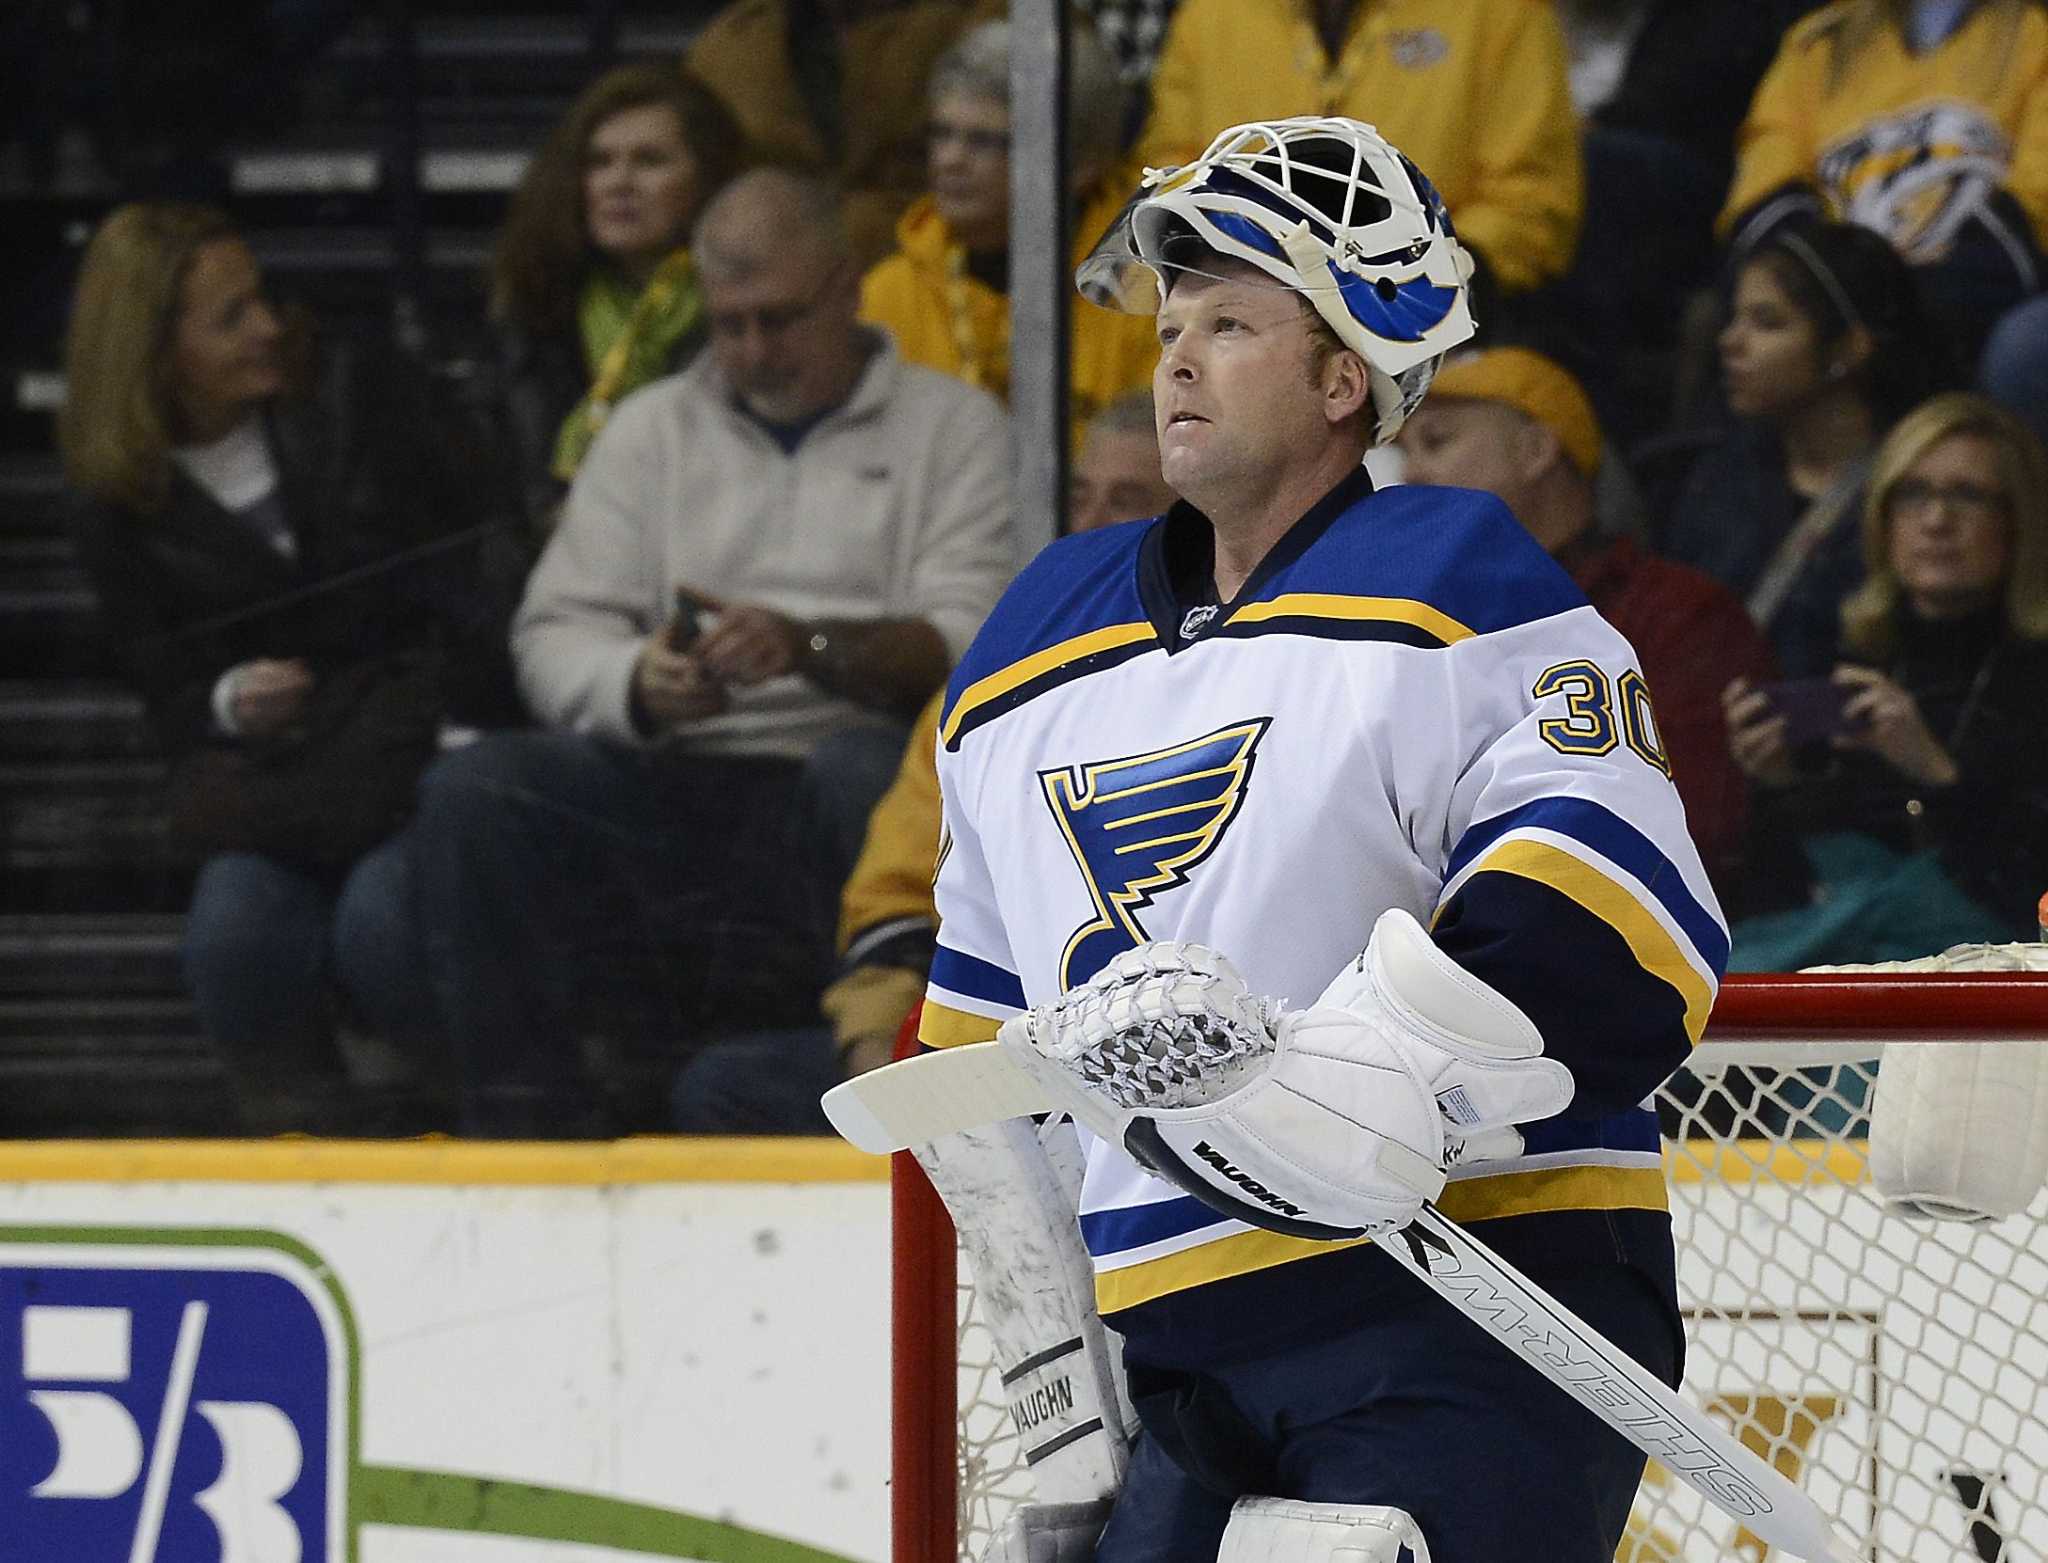 Here's Martin Brodeur of the St. Louis Blues in his V6 vintage setup.